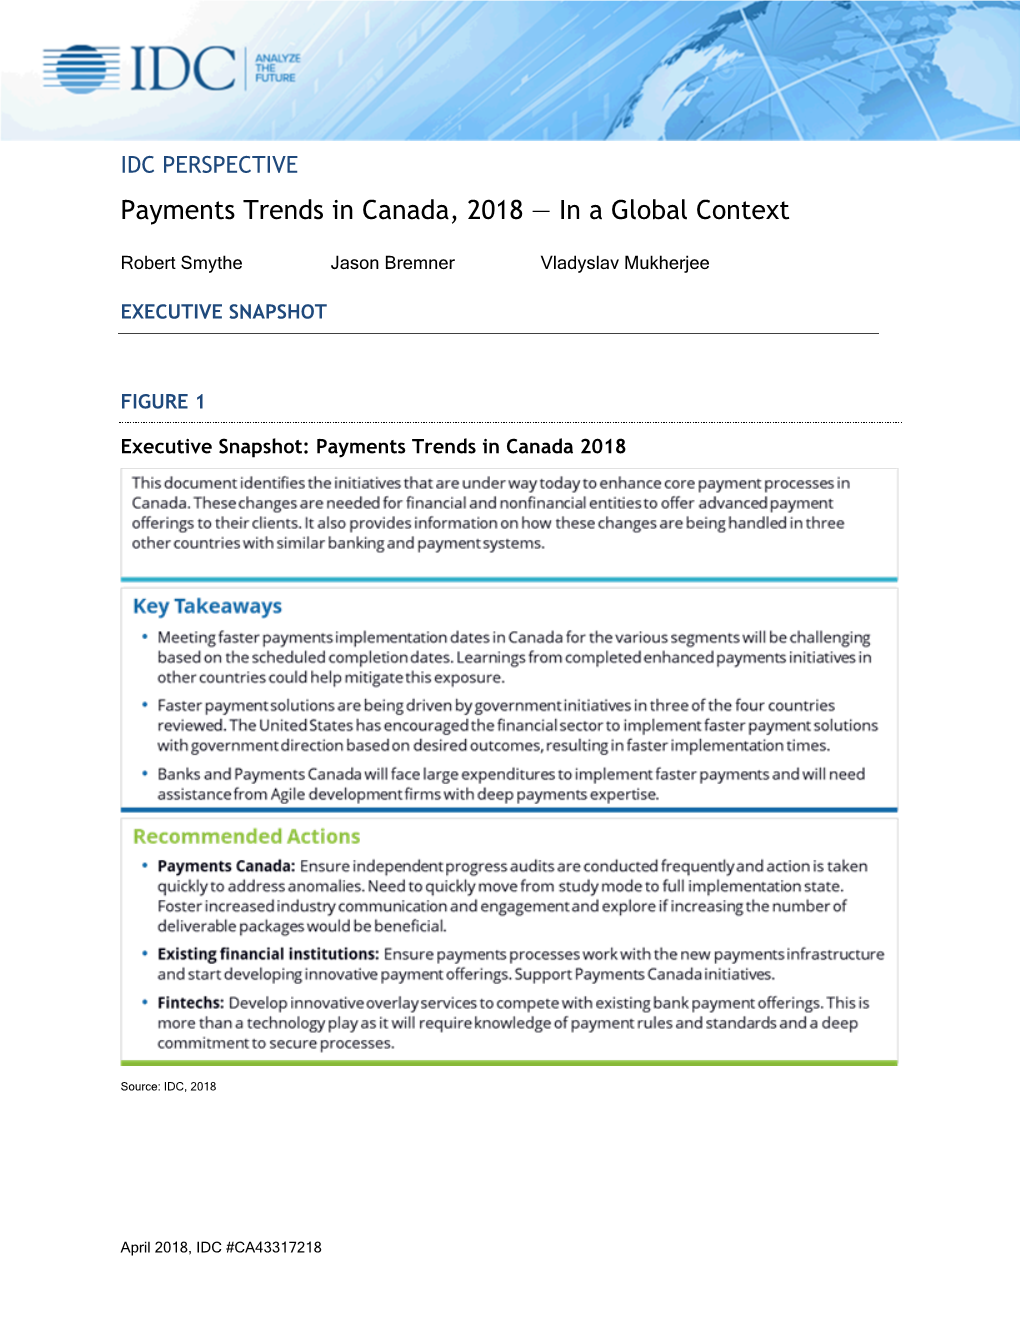 Payments Trends in Canada, 2018 — in a Global Context